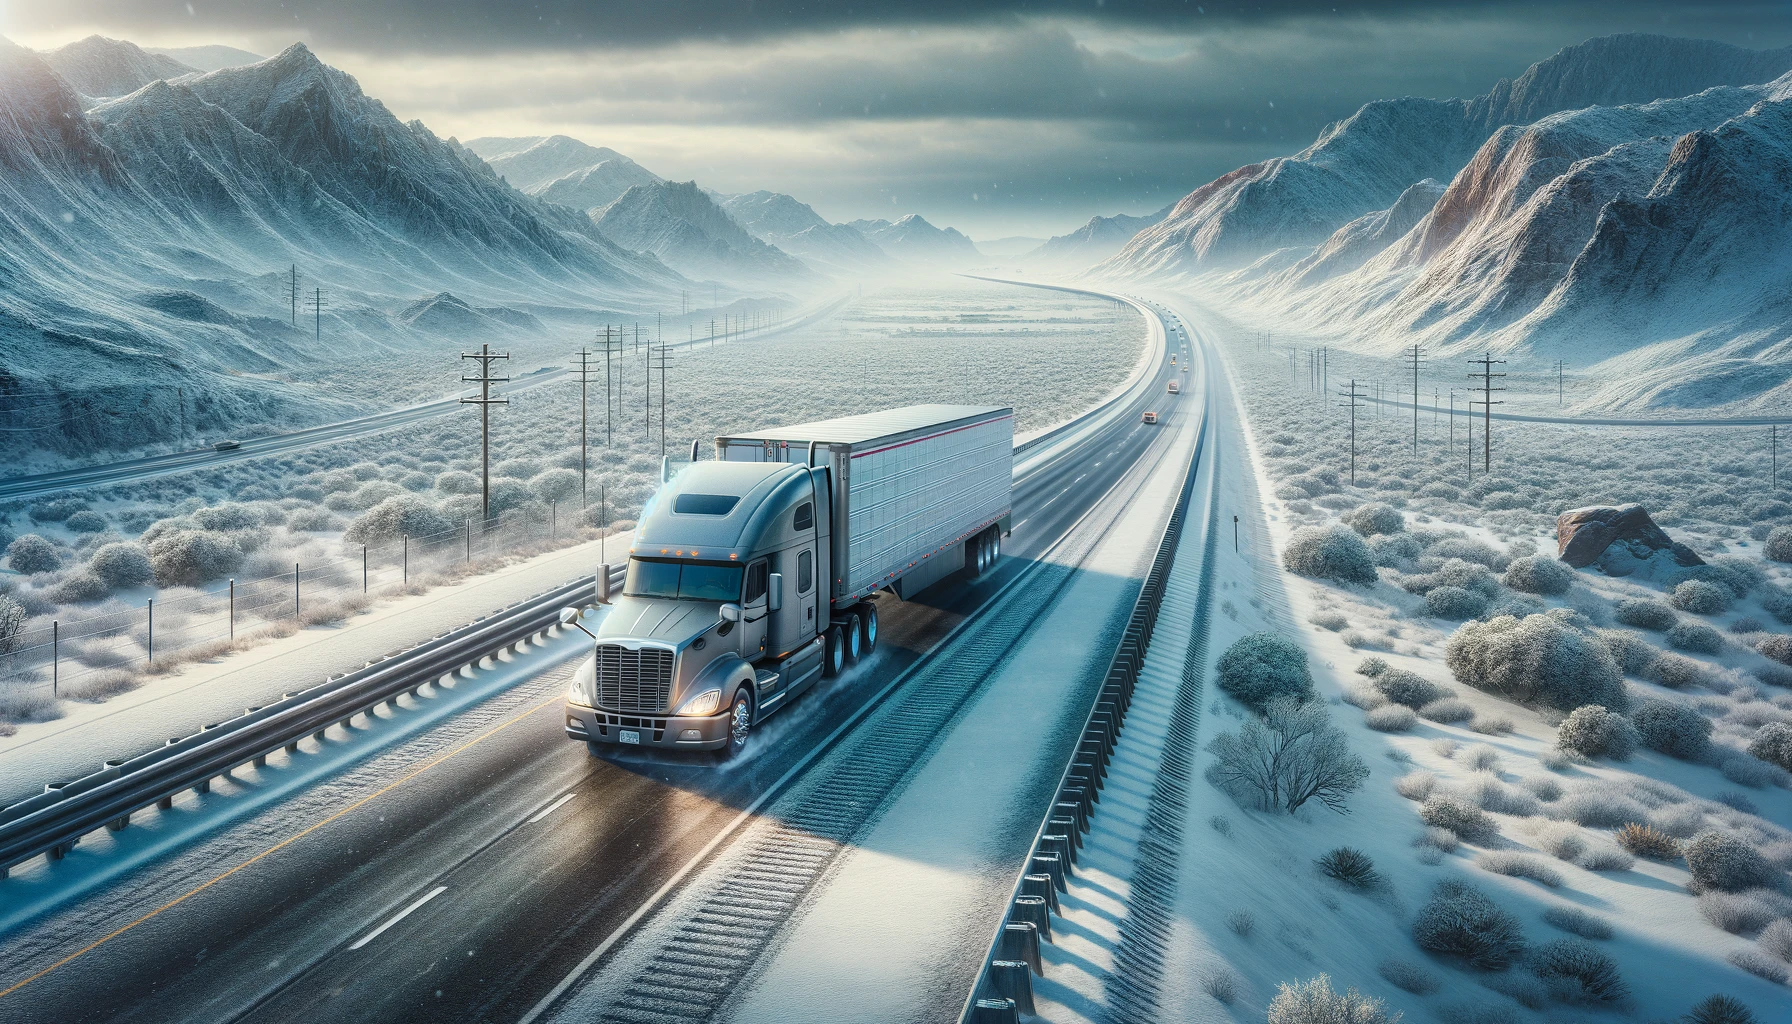 Truck driving safely on a snowy road during winter, highlighting winter trucking safety.